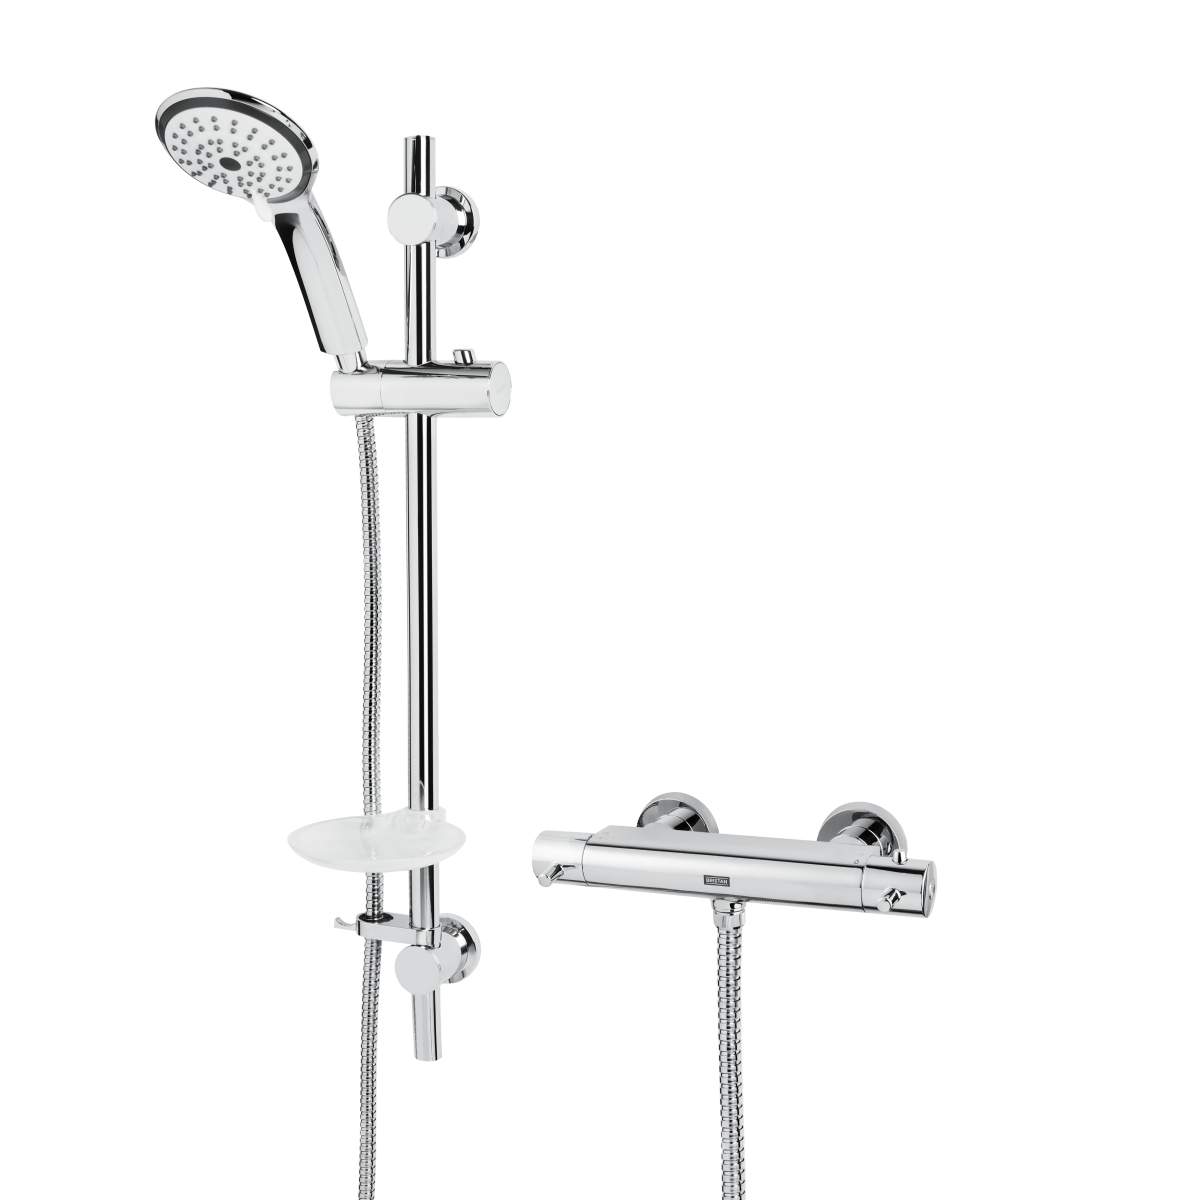 Bristan Prism Thermostatic Bar Shower with Multi Function Handset (PM SHXMMCTFF C)